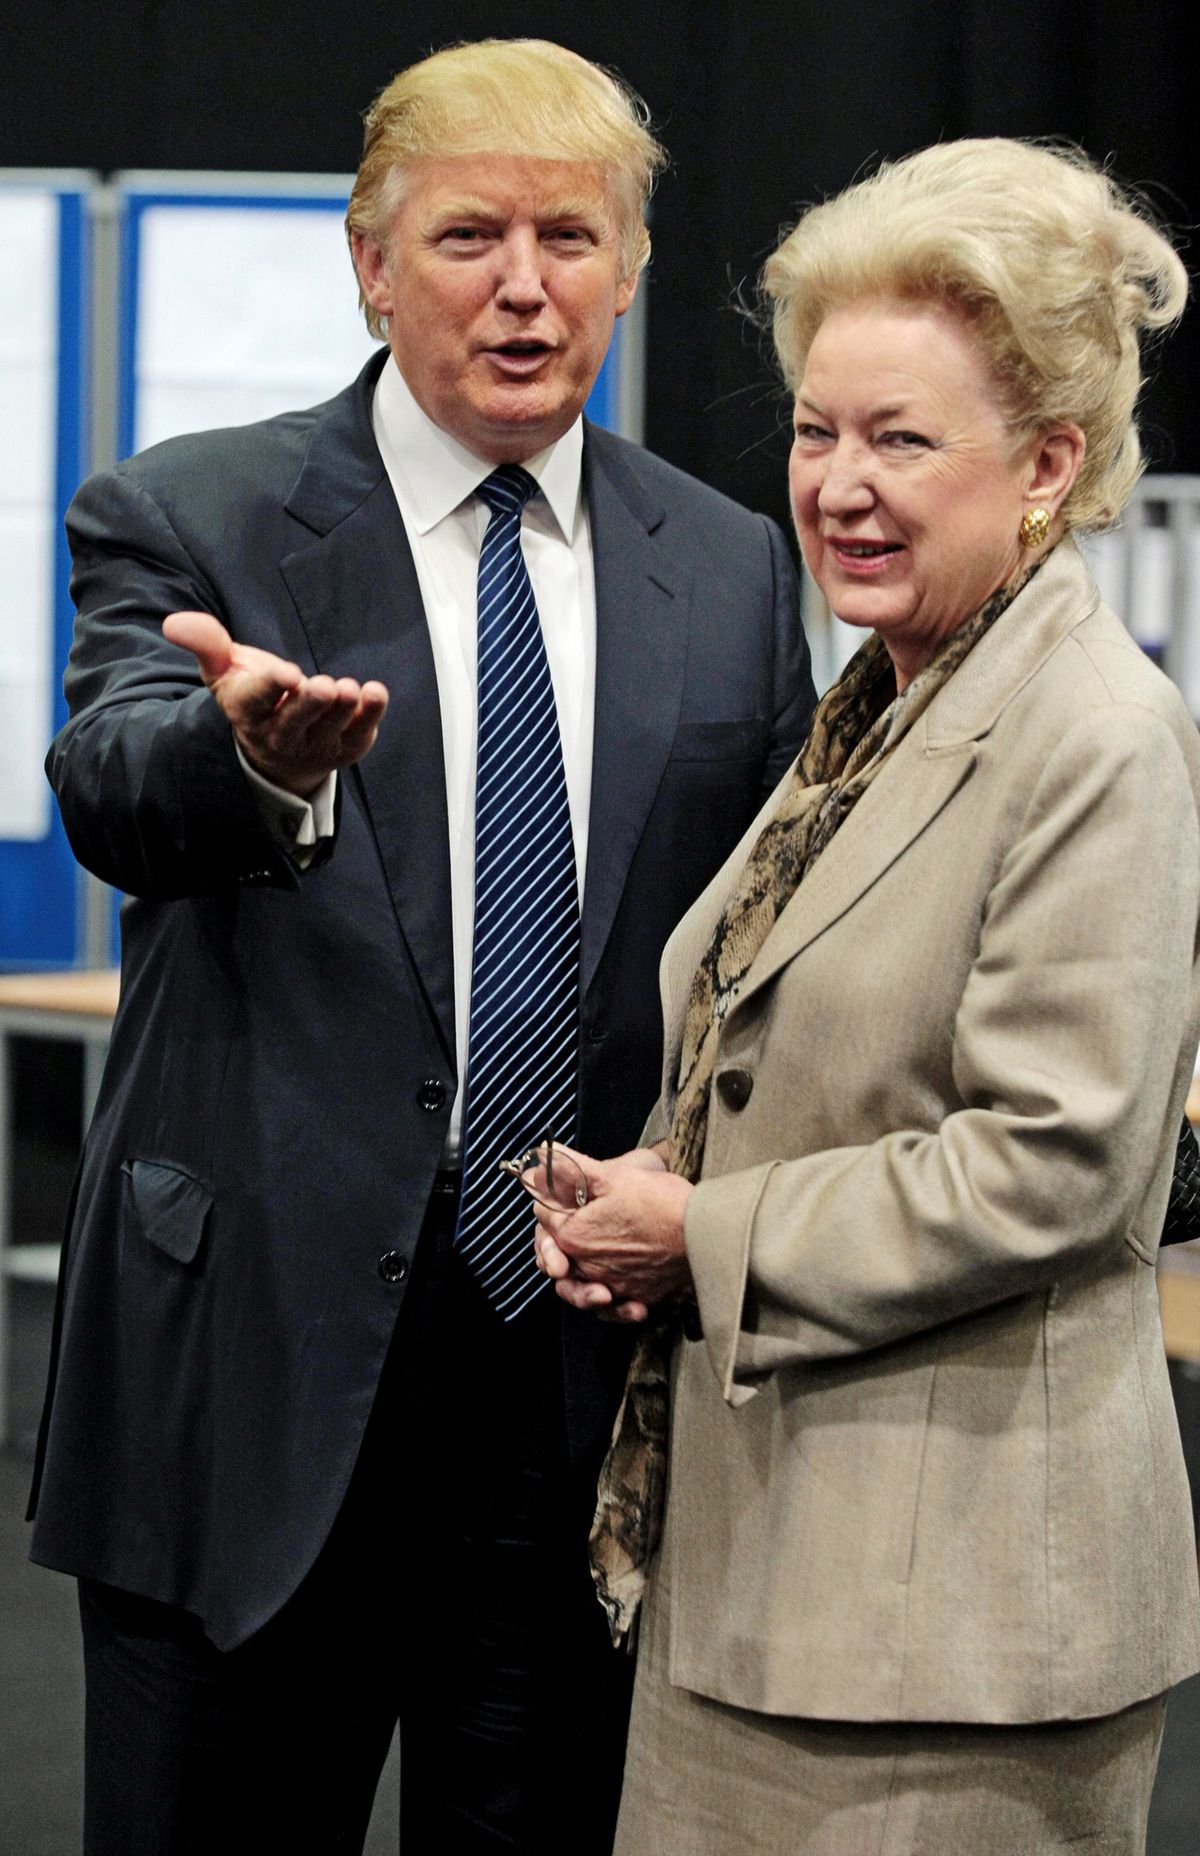 (FILES) Former US president and property tycoon Donald Trump (L) is pictured with his sister Maryanne Trump Barry as they adjourn for lunch during a public inquiry over his plans to build a golf resort near Aberdeen, at the Aberdeen Exhibition & Conference centre, Scotland, on June 10, 2008. Donald Trump's older sister, a former judge who fell out with him during the later stages of his presidency, has died in New York at the age of 86, US media reported on November 13, 2023. Maryanne Trump Barry passed away at her home in Manhattan, the New York Times said, describing her as "both his protector and critic throughout their lives." (Photo by Ed JONES / AFP)